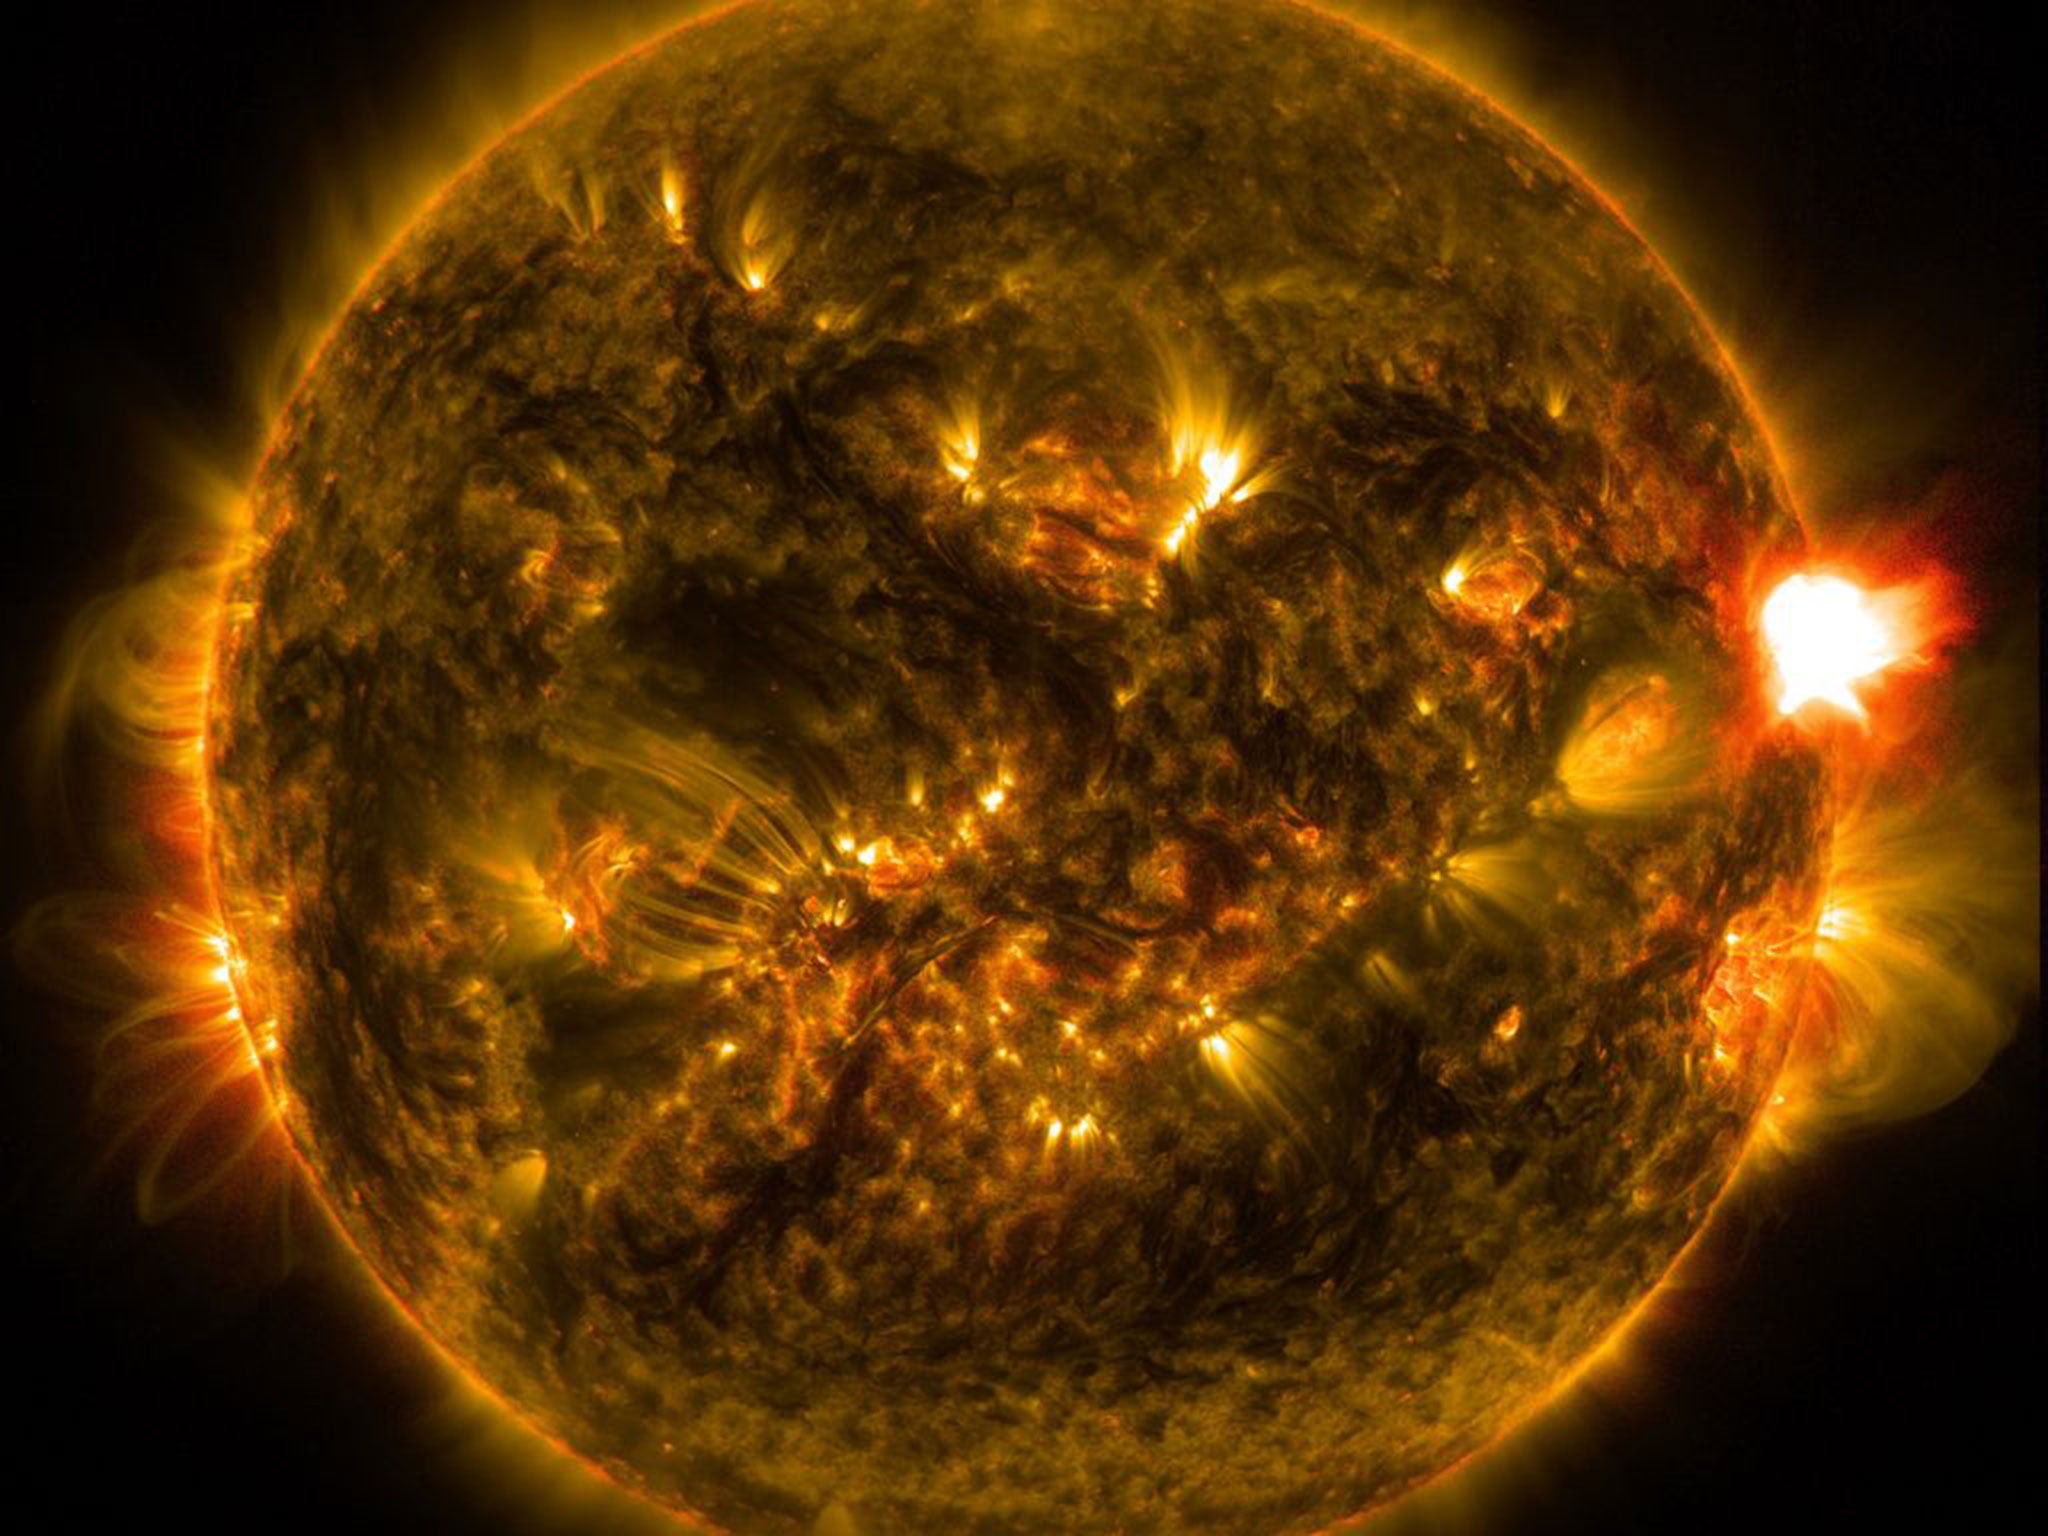 The energy released from a solar flare is the equivalent to 100-megaton atomic bomb